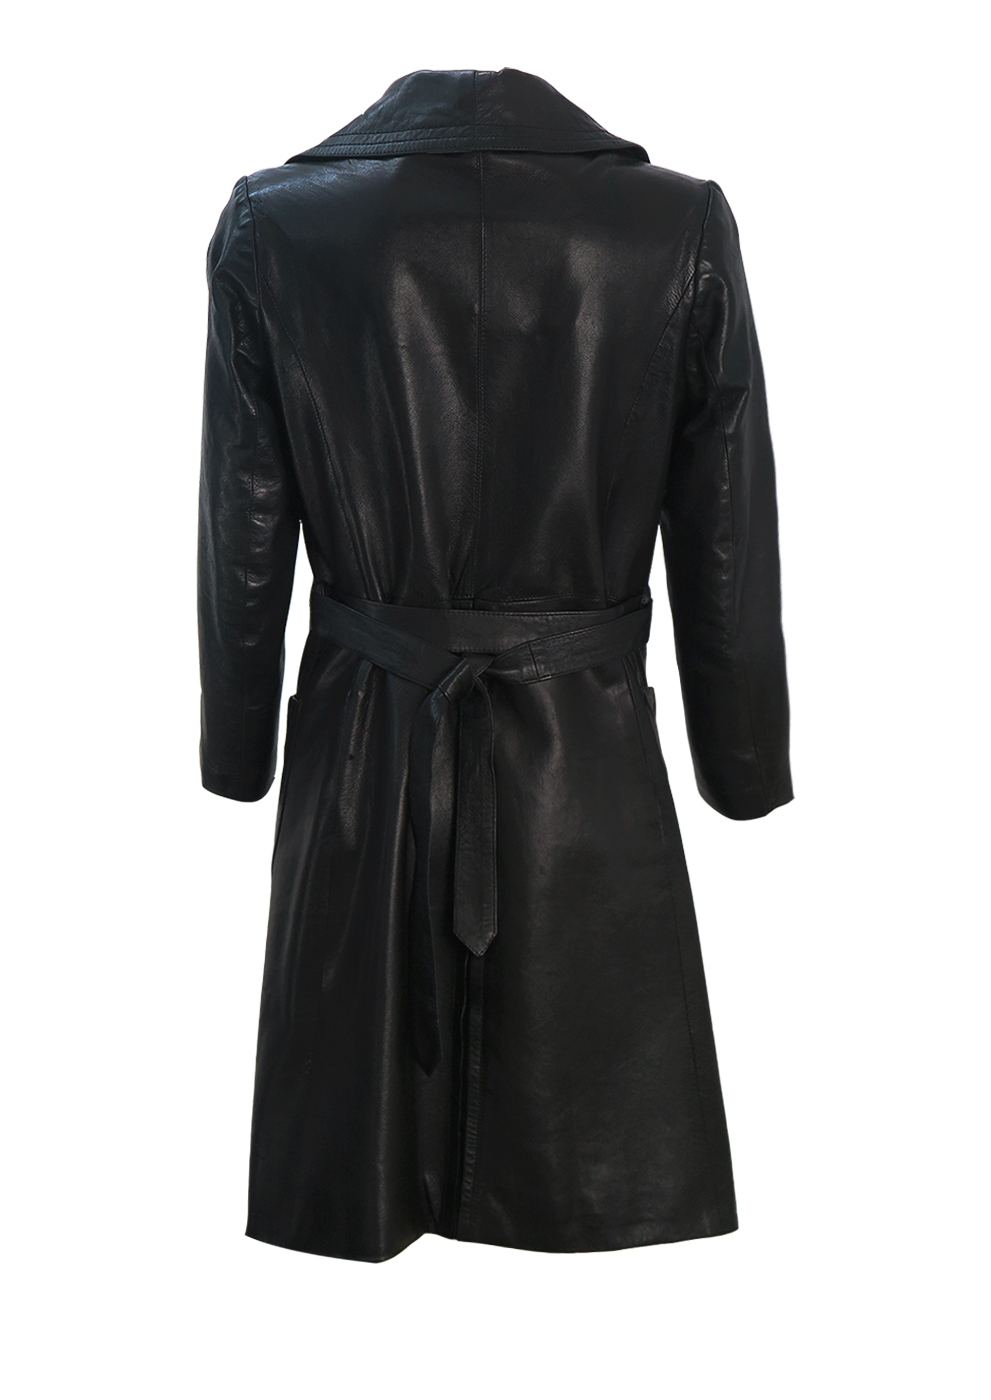 Vintage 70's Black Double Breasted Leather Trench Coat - S/M | Reign ...